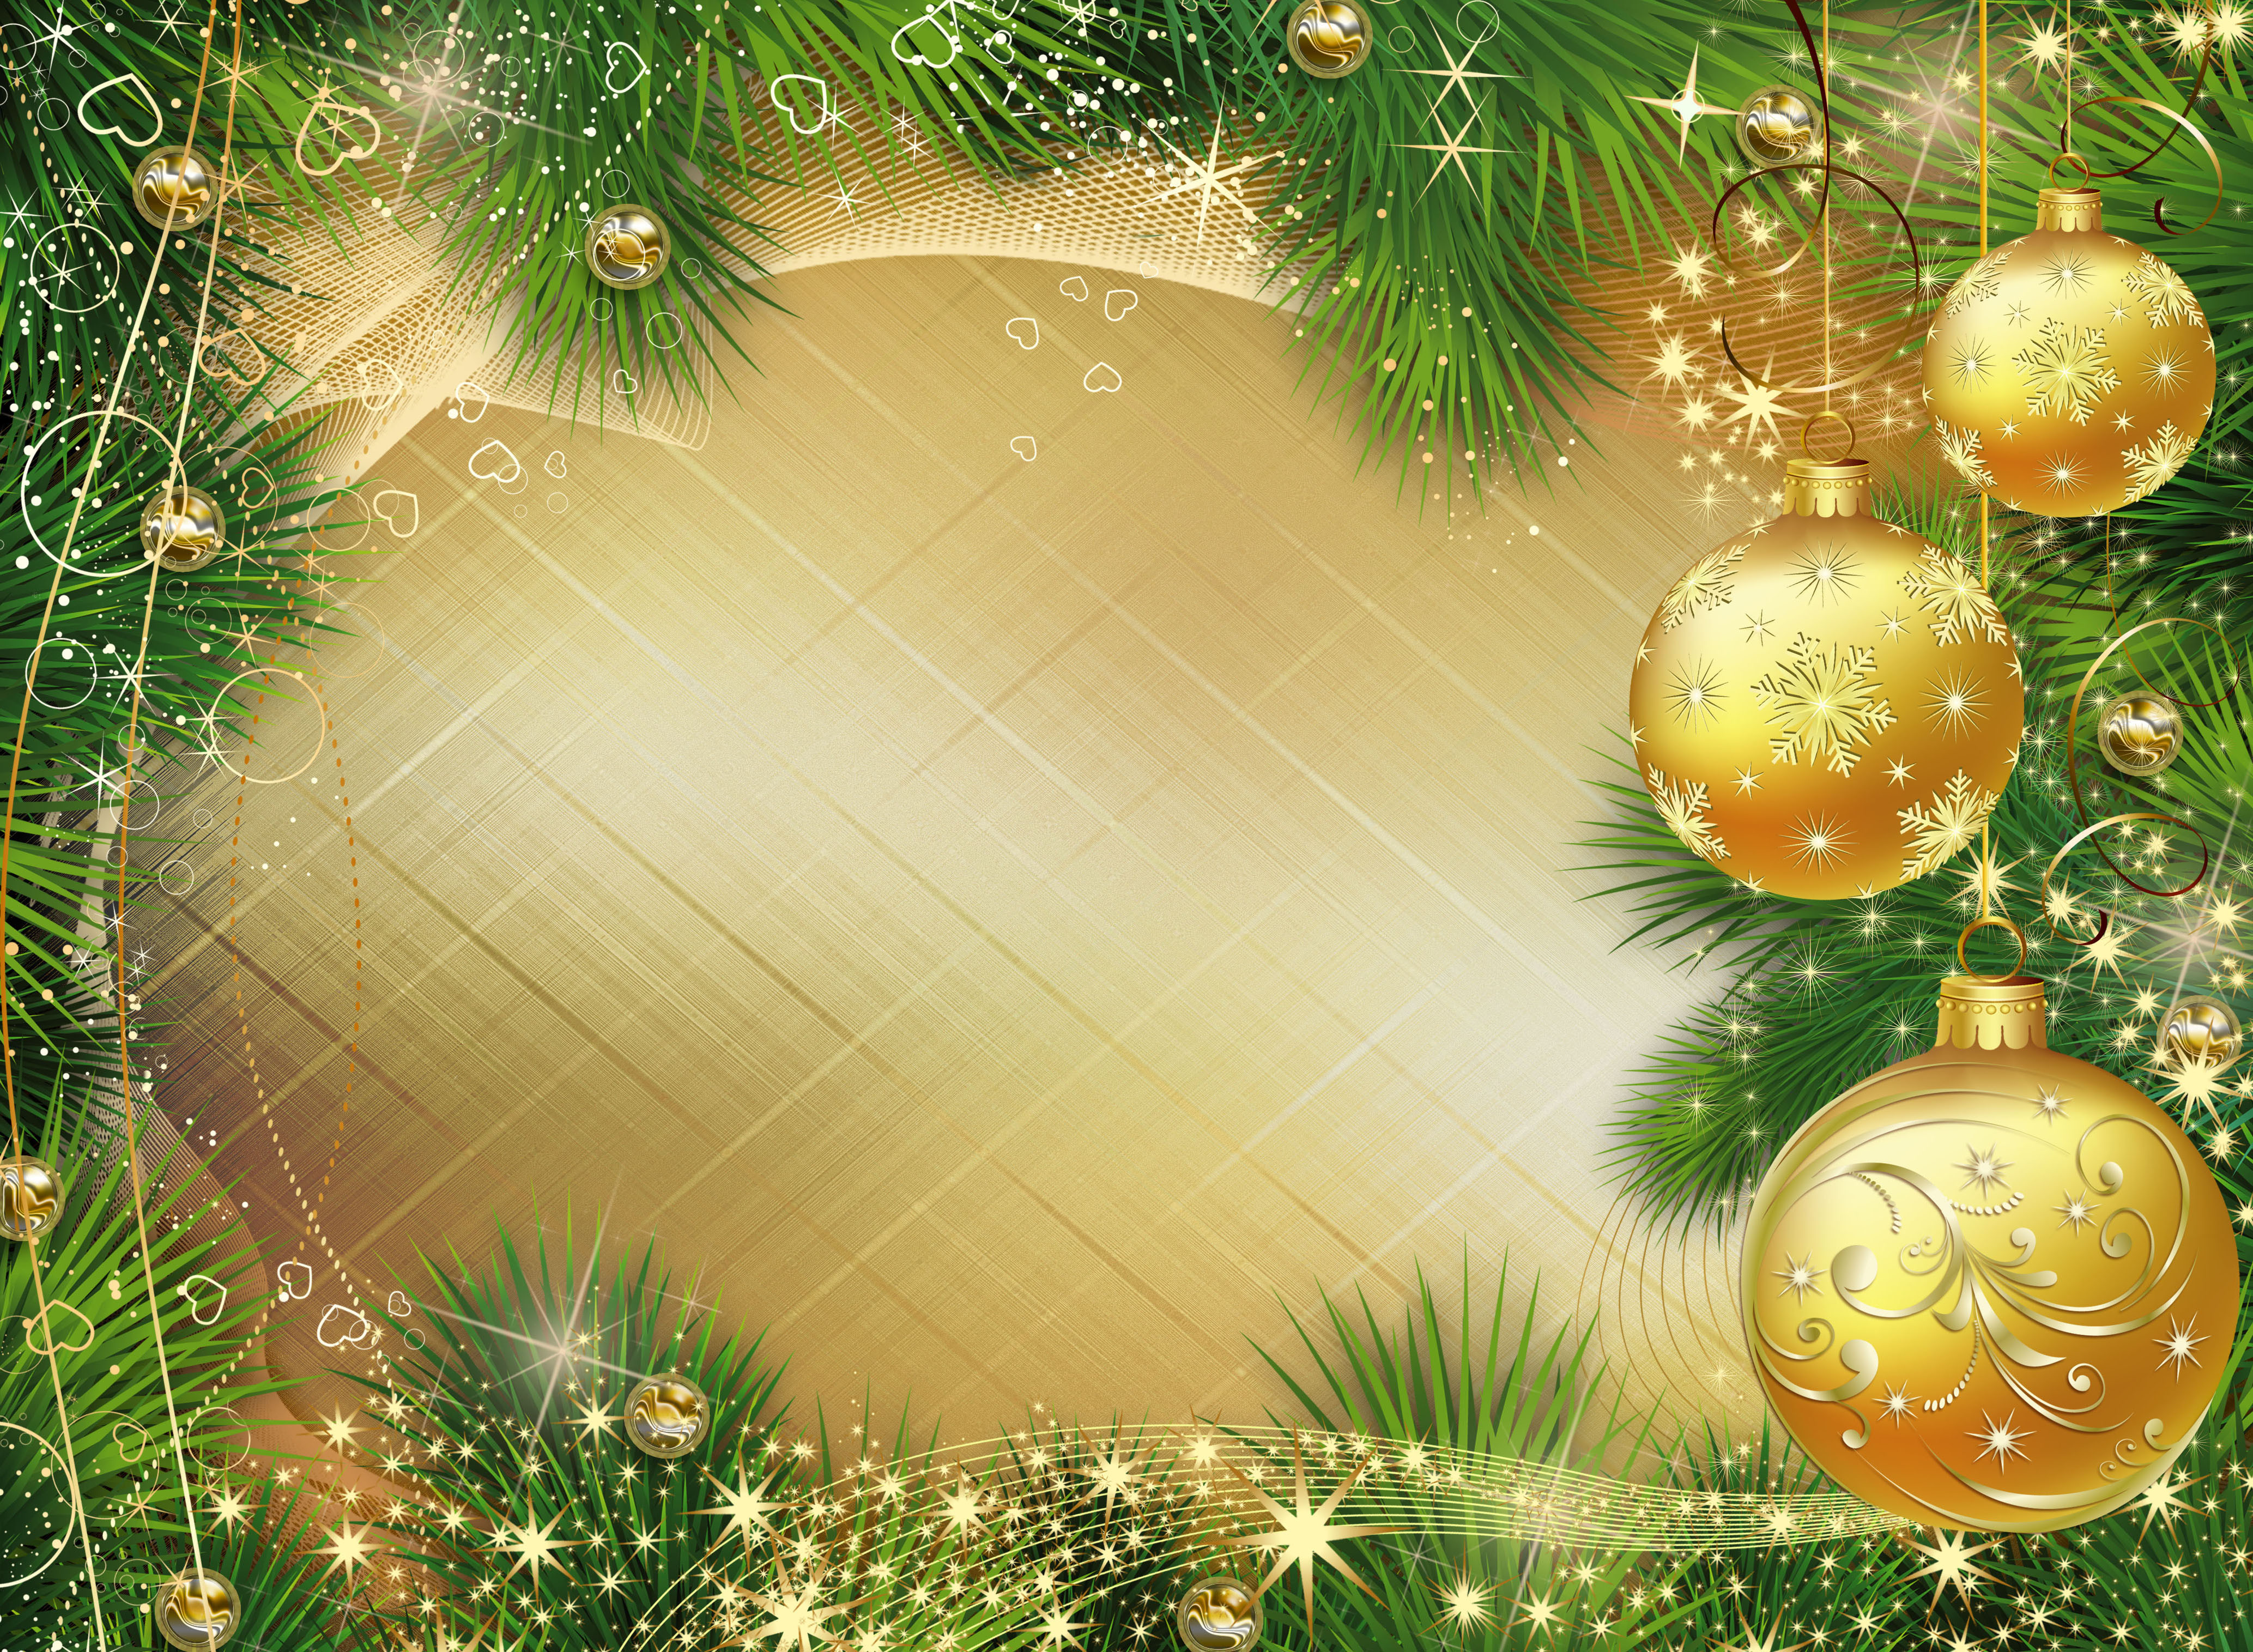 Free photo Free christmas backgrounds, christmas wallpaper photos on the phone